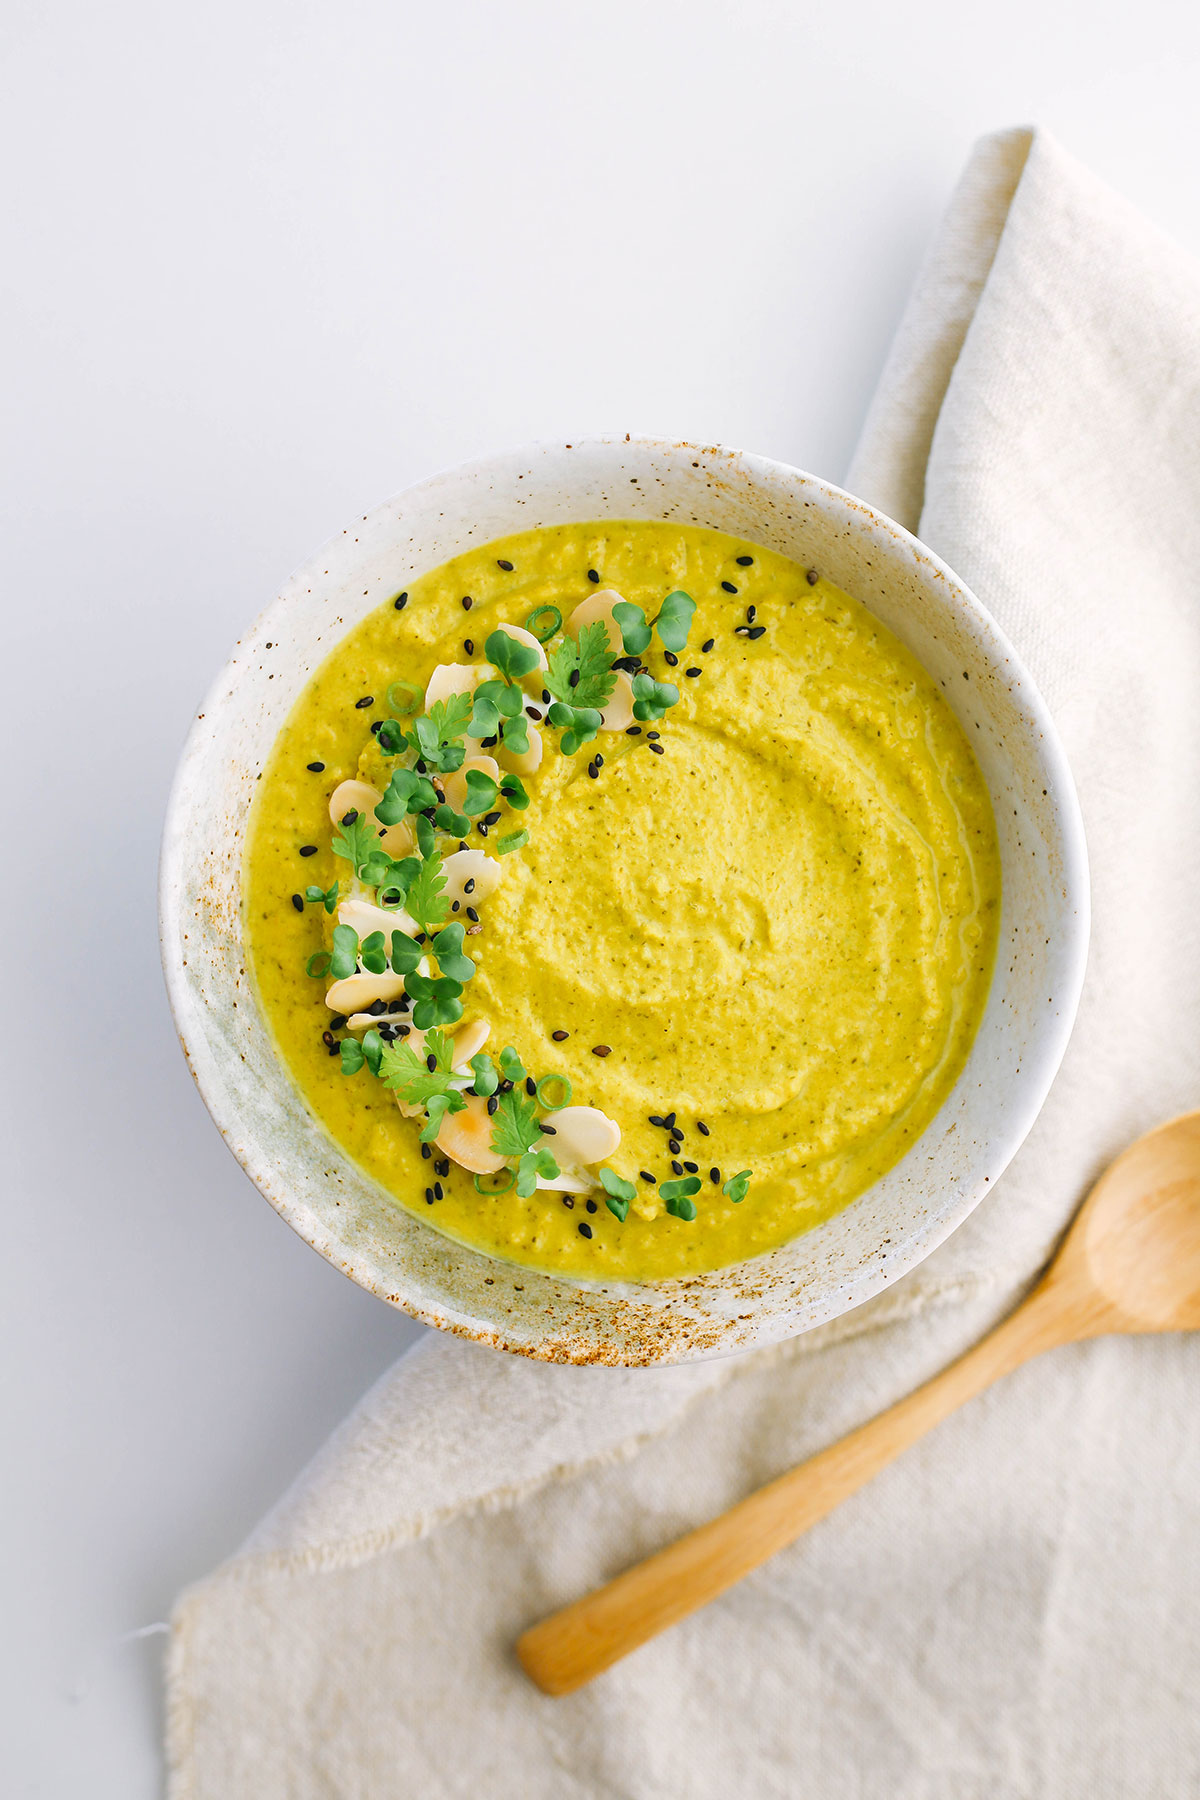 Keto broccoli soup for low carb. Easy recipe with turmeric and ginger.